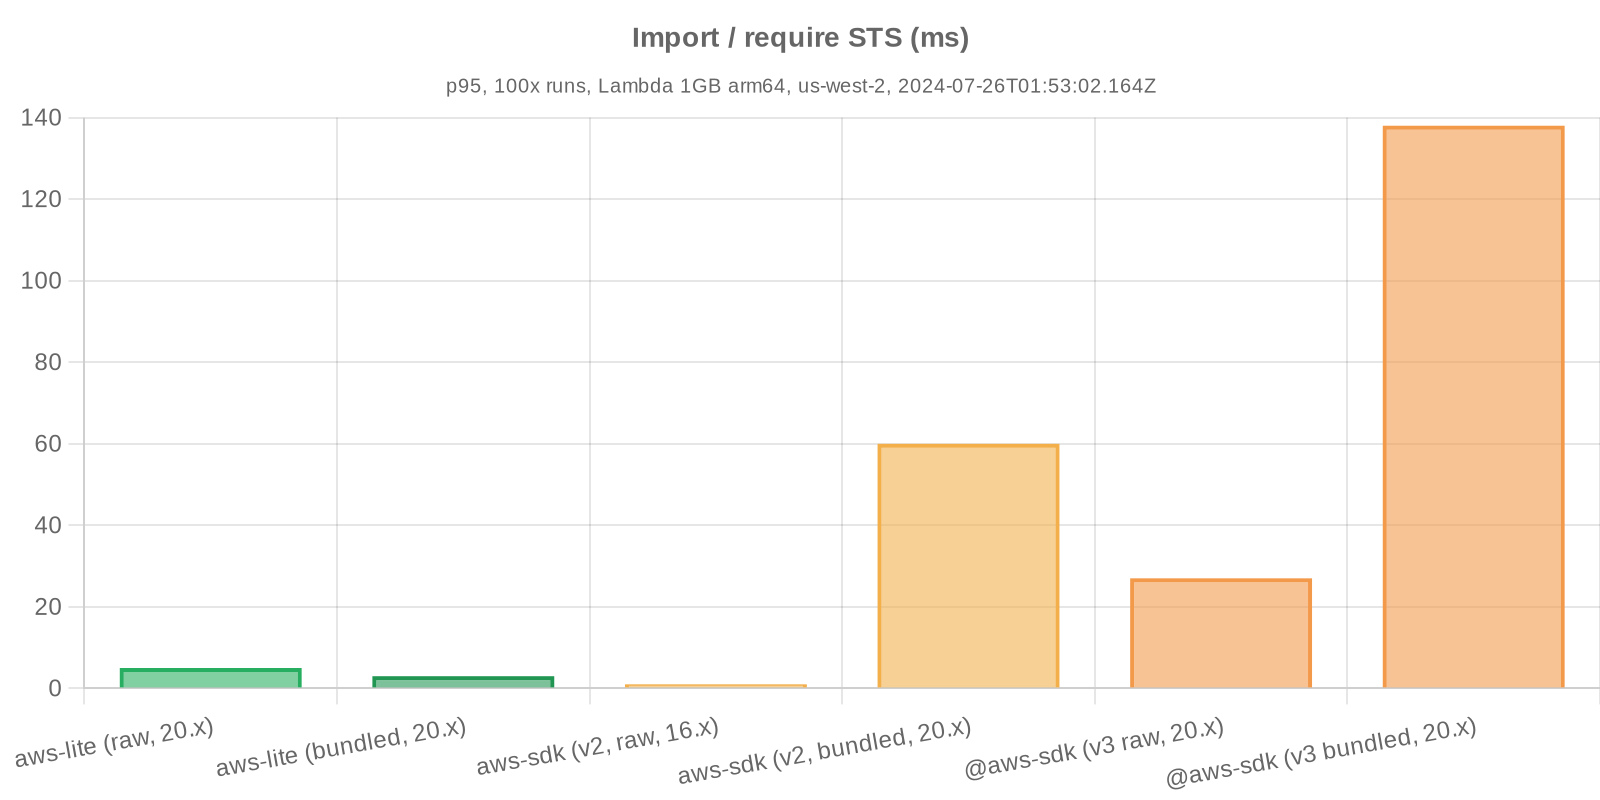 Benchmark statistics - Import / require STS